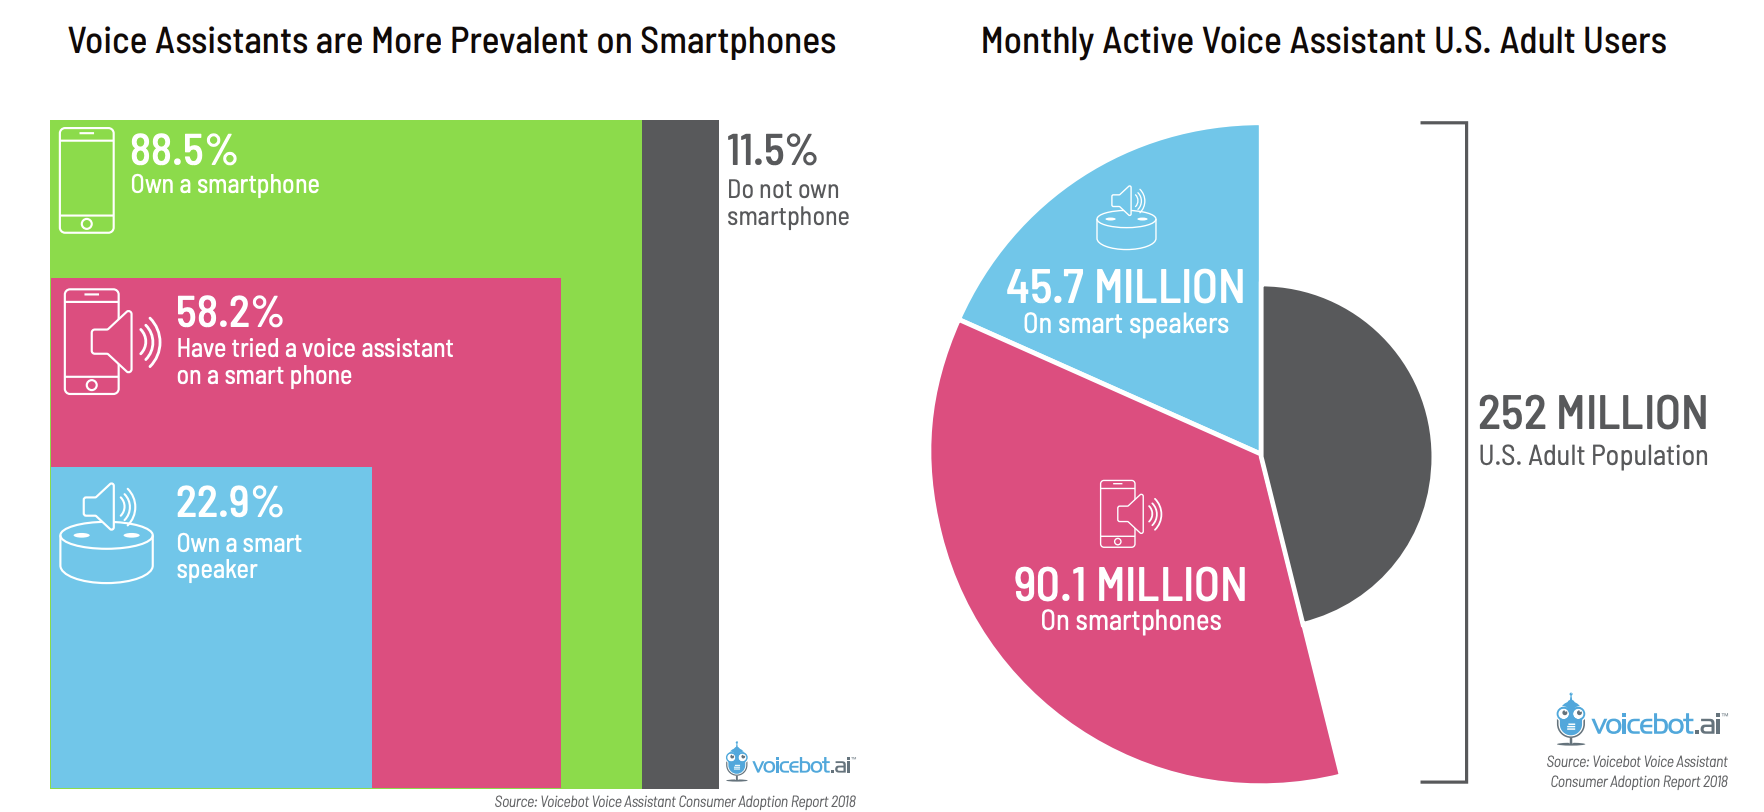 Infographic showing statistics of voice assistant usage in the United States